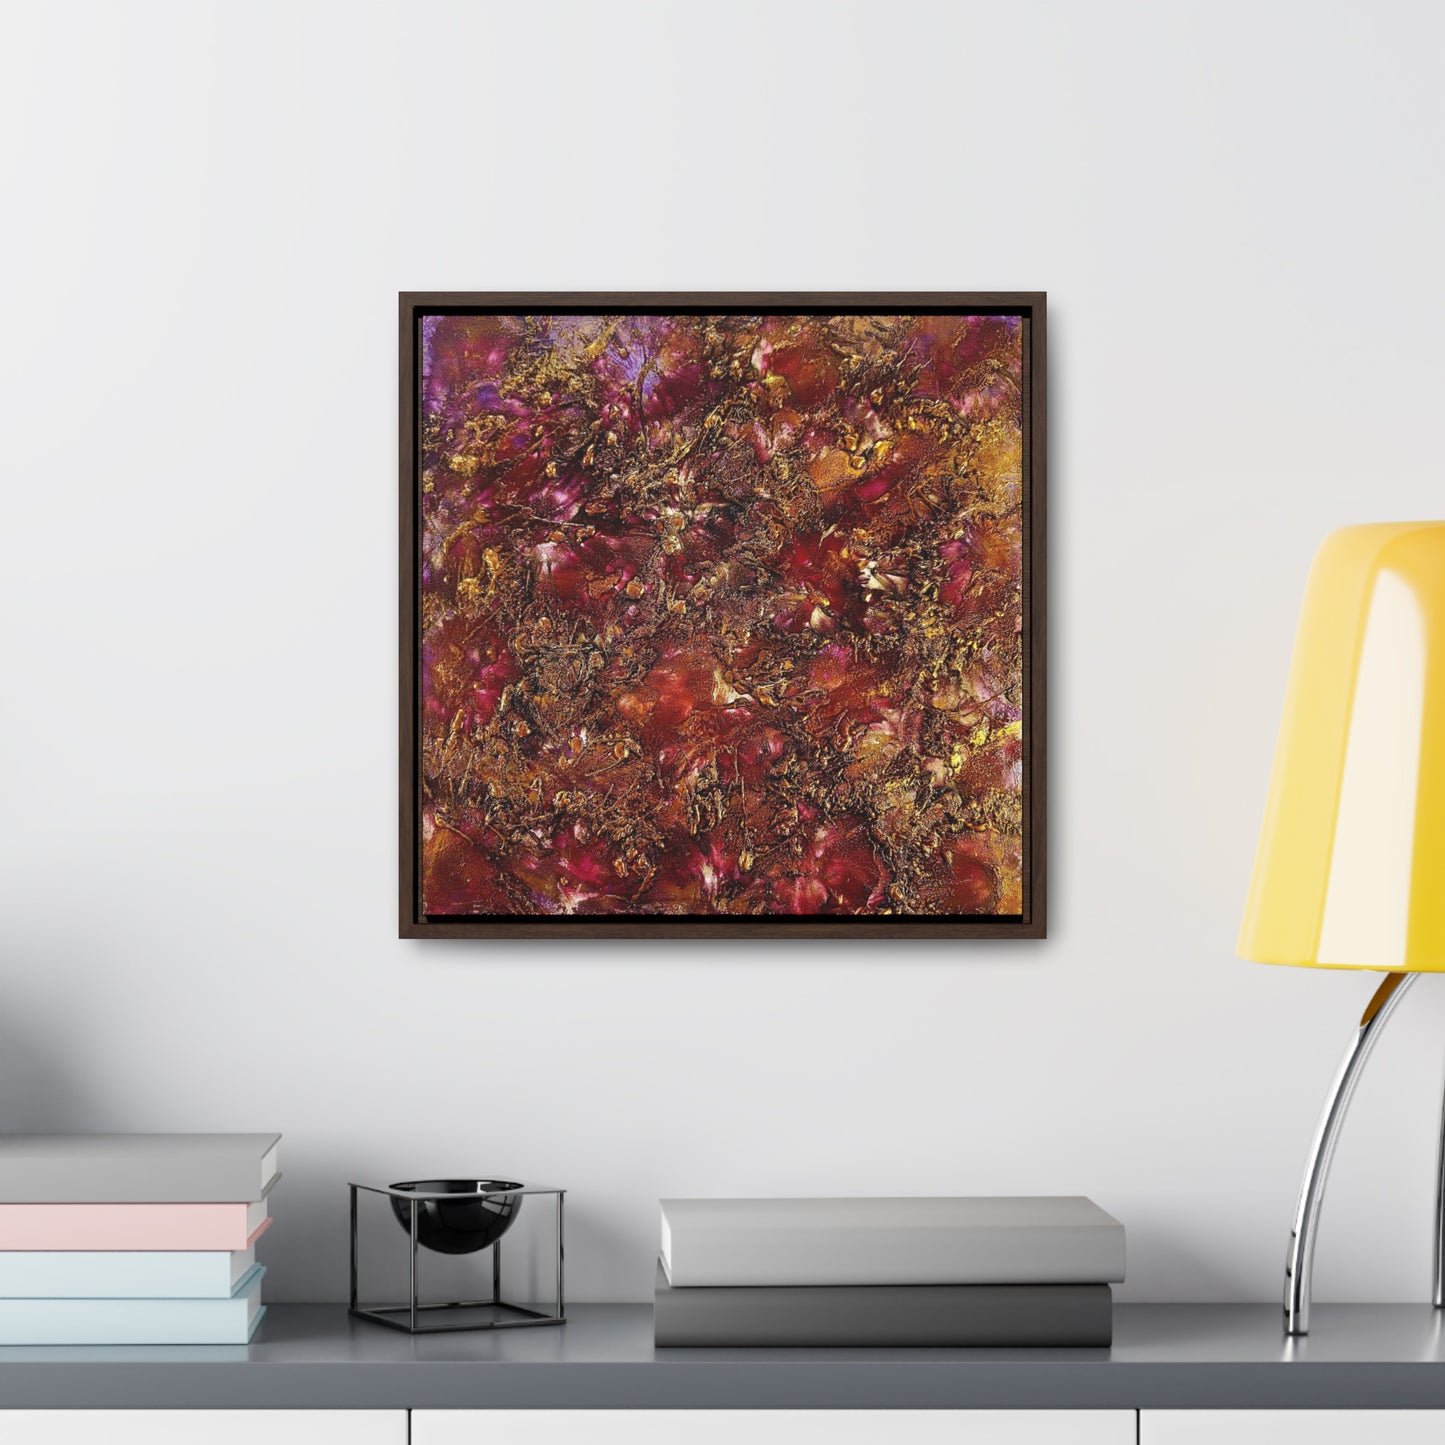 Framed Square Canvas Print - Ember Glow